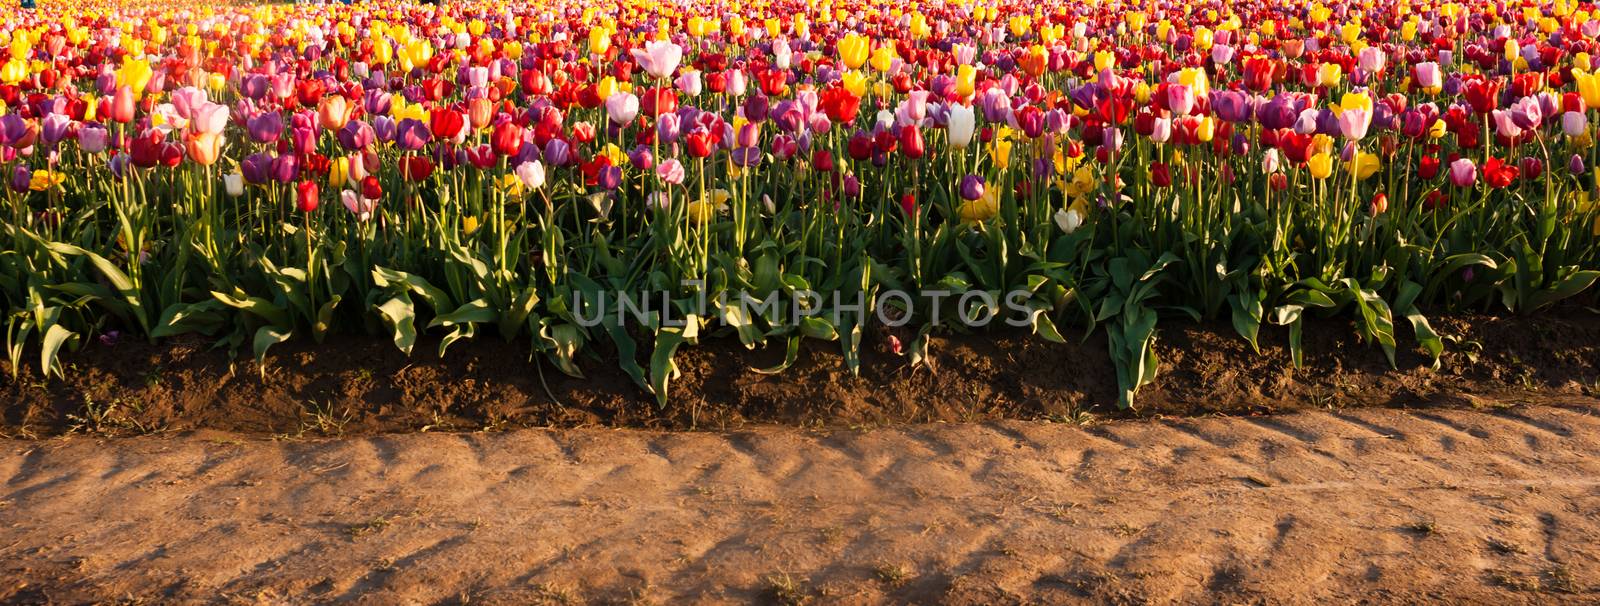 Horizontal panoramic composition of a large field full of Tulips ready to harvest and the tractor path used to get tothem